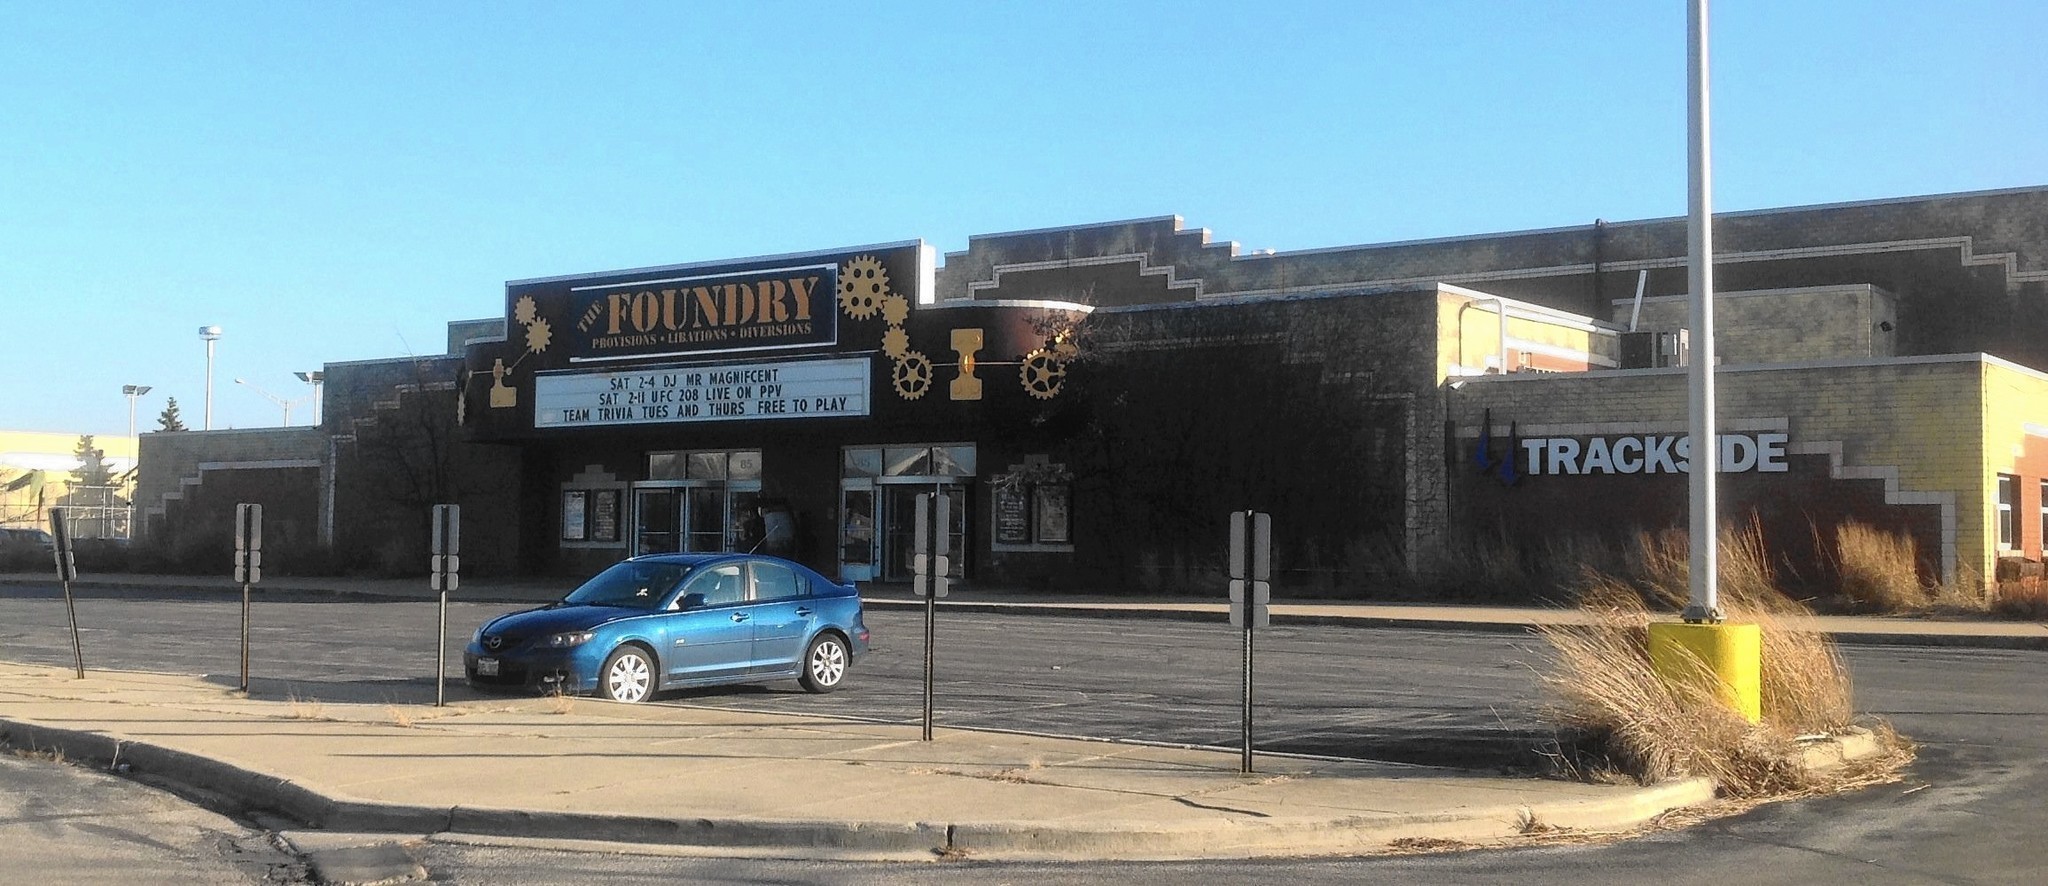 The Foundry in Aurora sold, to become new entertainment venue